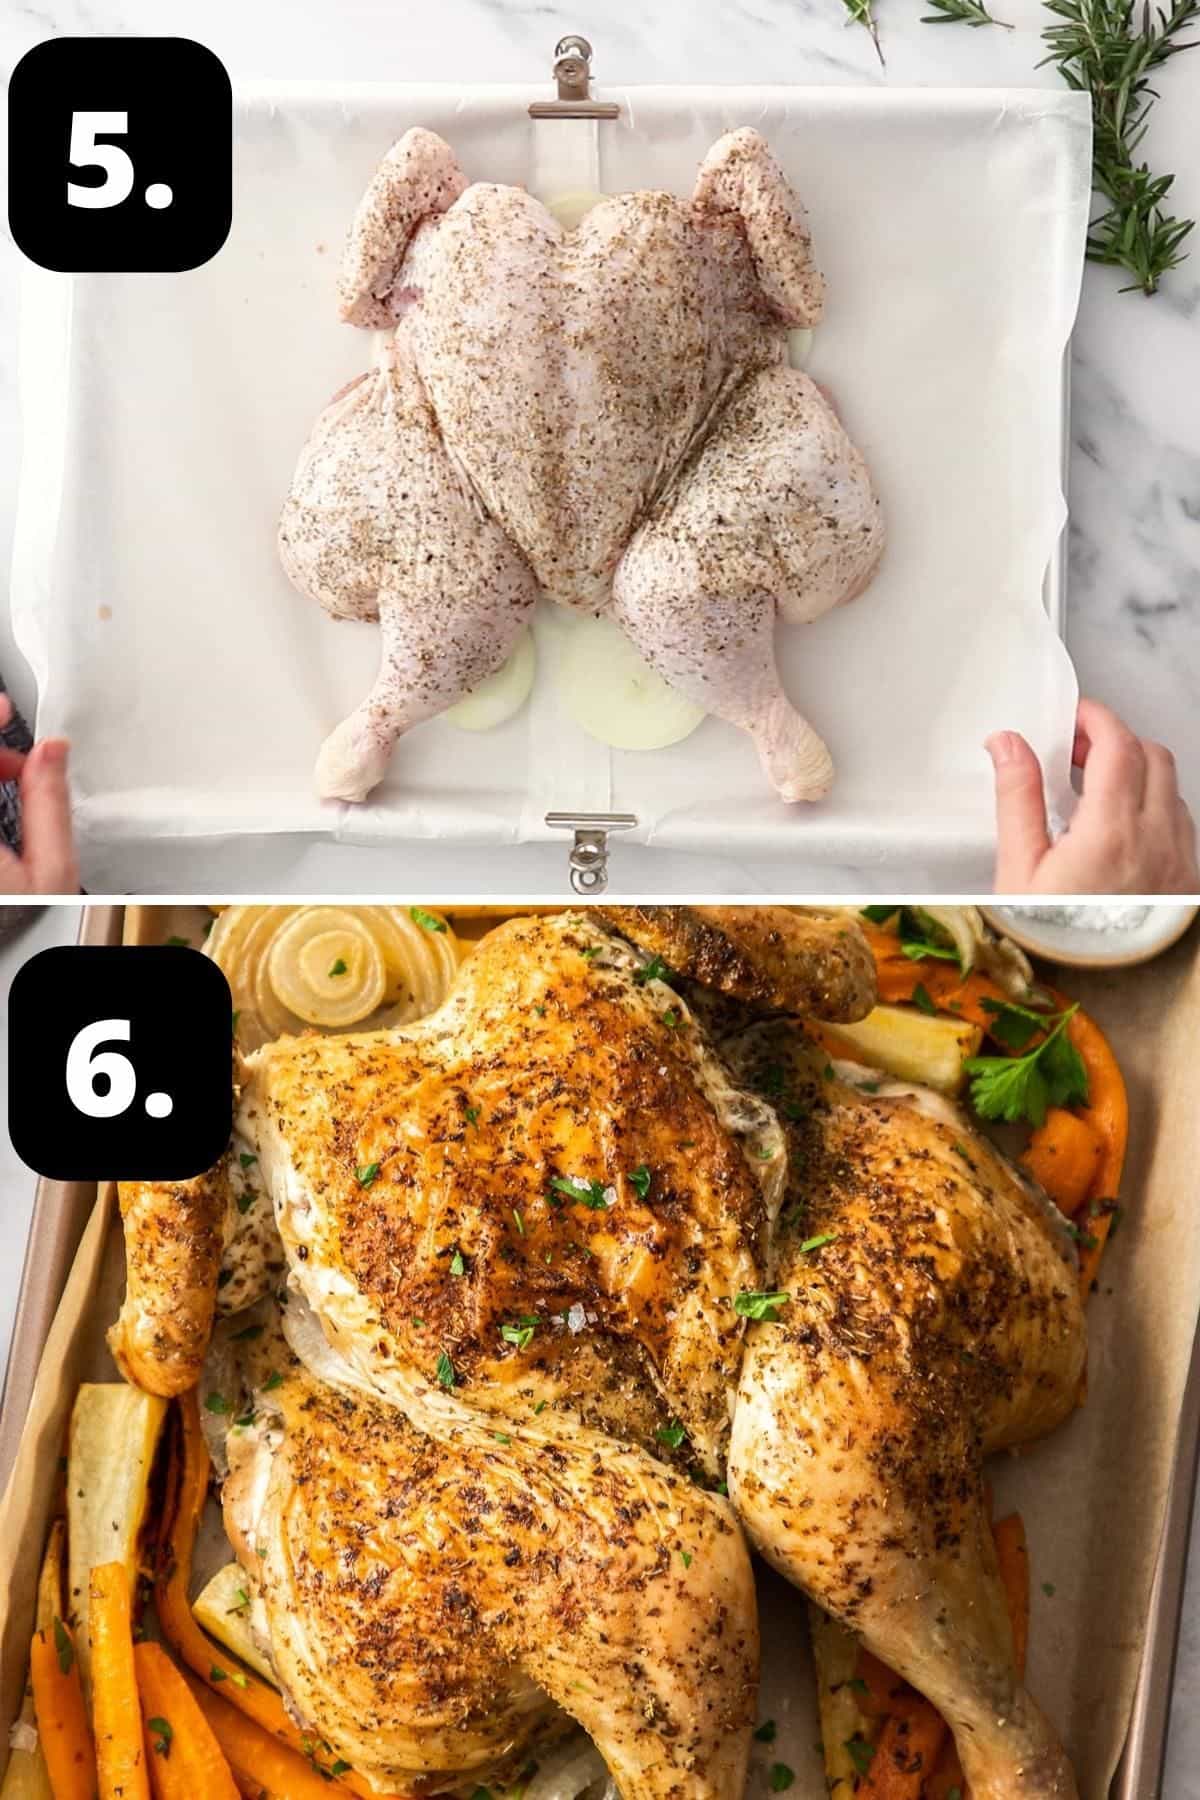 Steps 5-6 of preparing this recipe - the chicken prepared and ready to roast and the roasted chicken out of the oven.